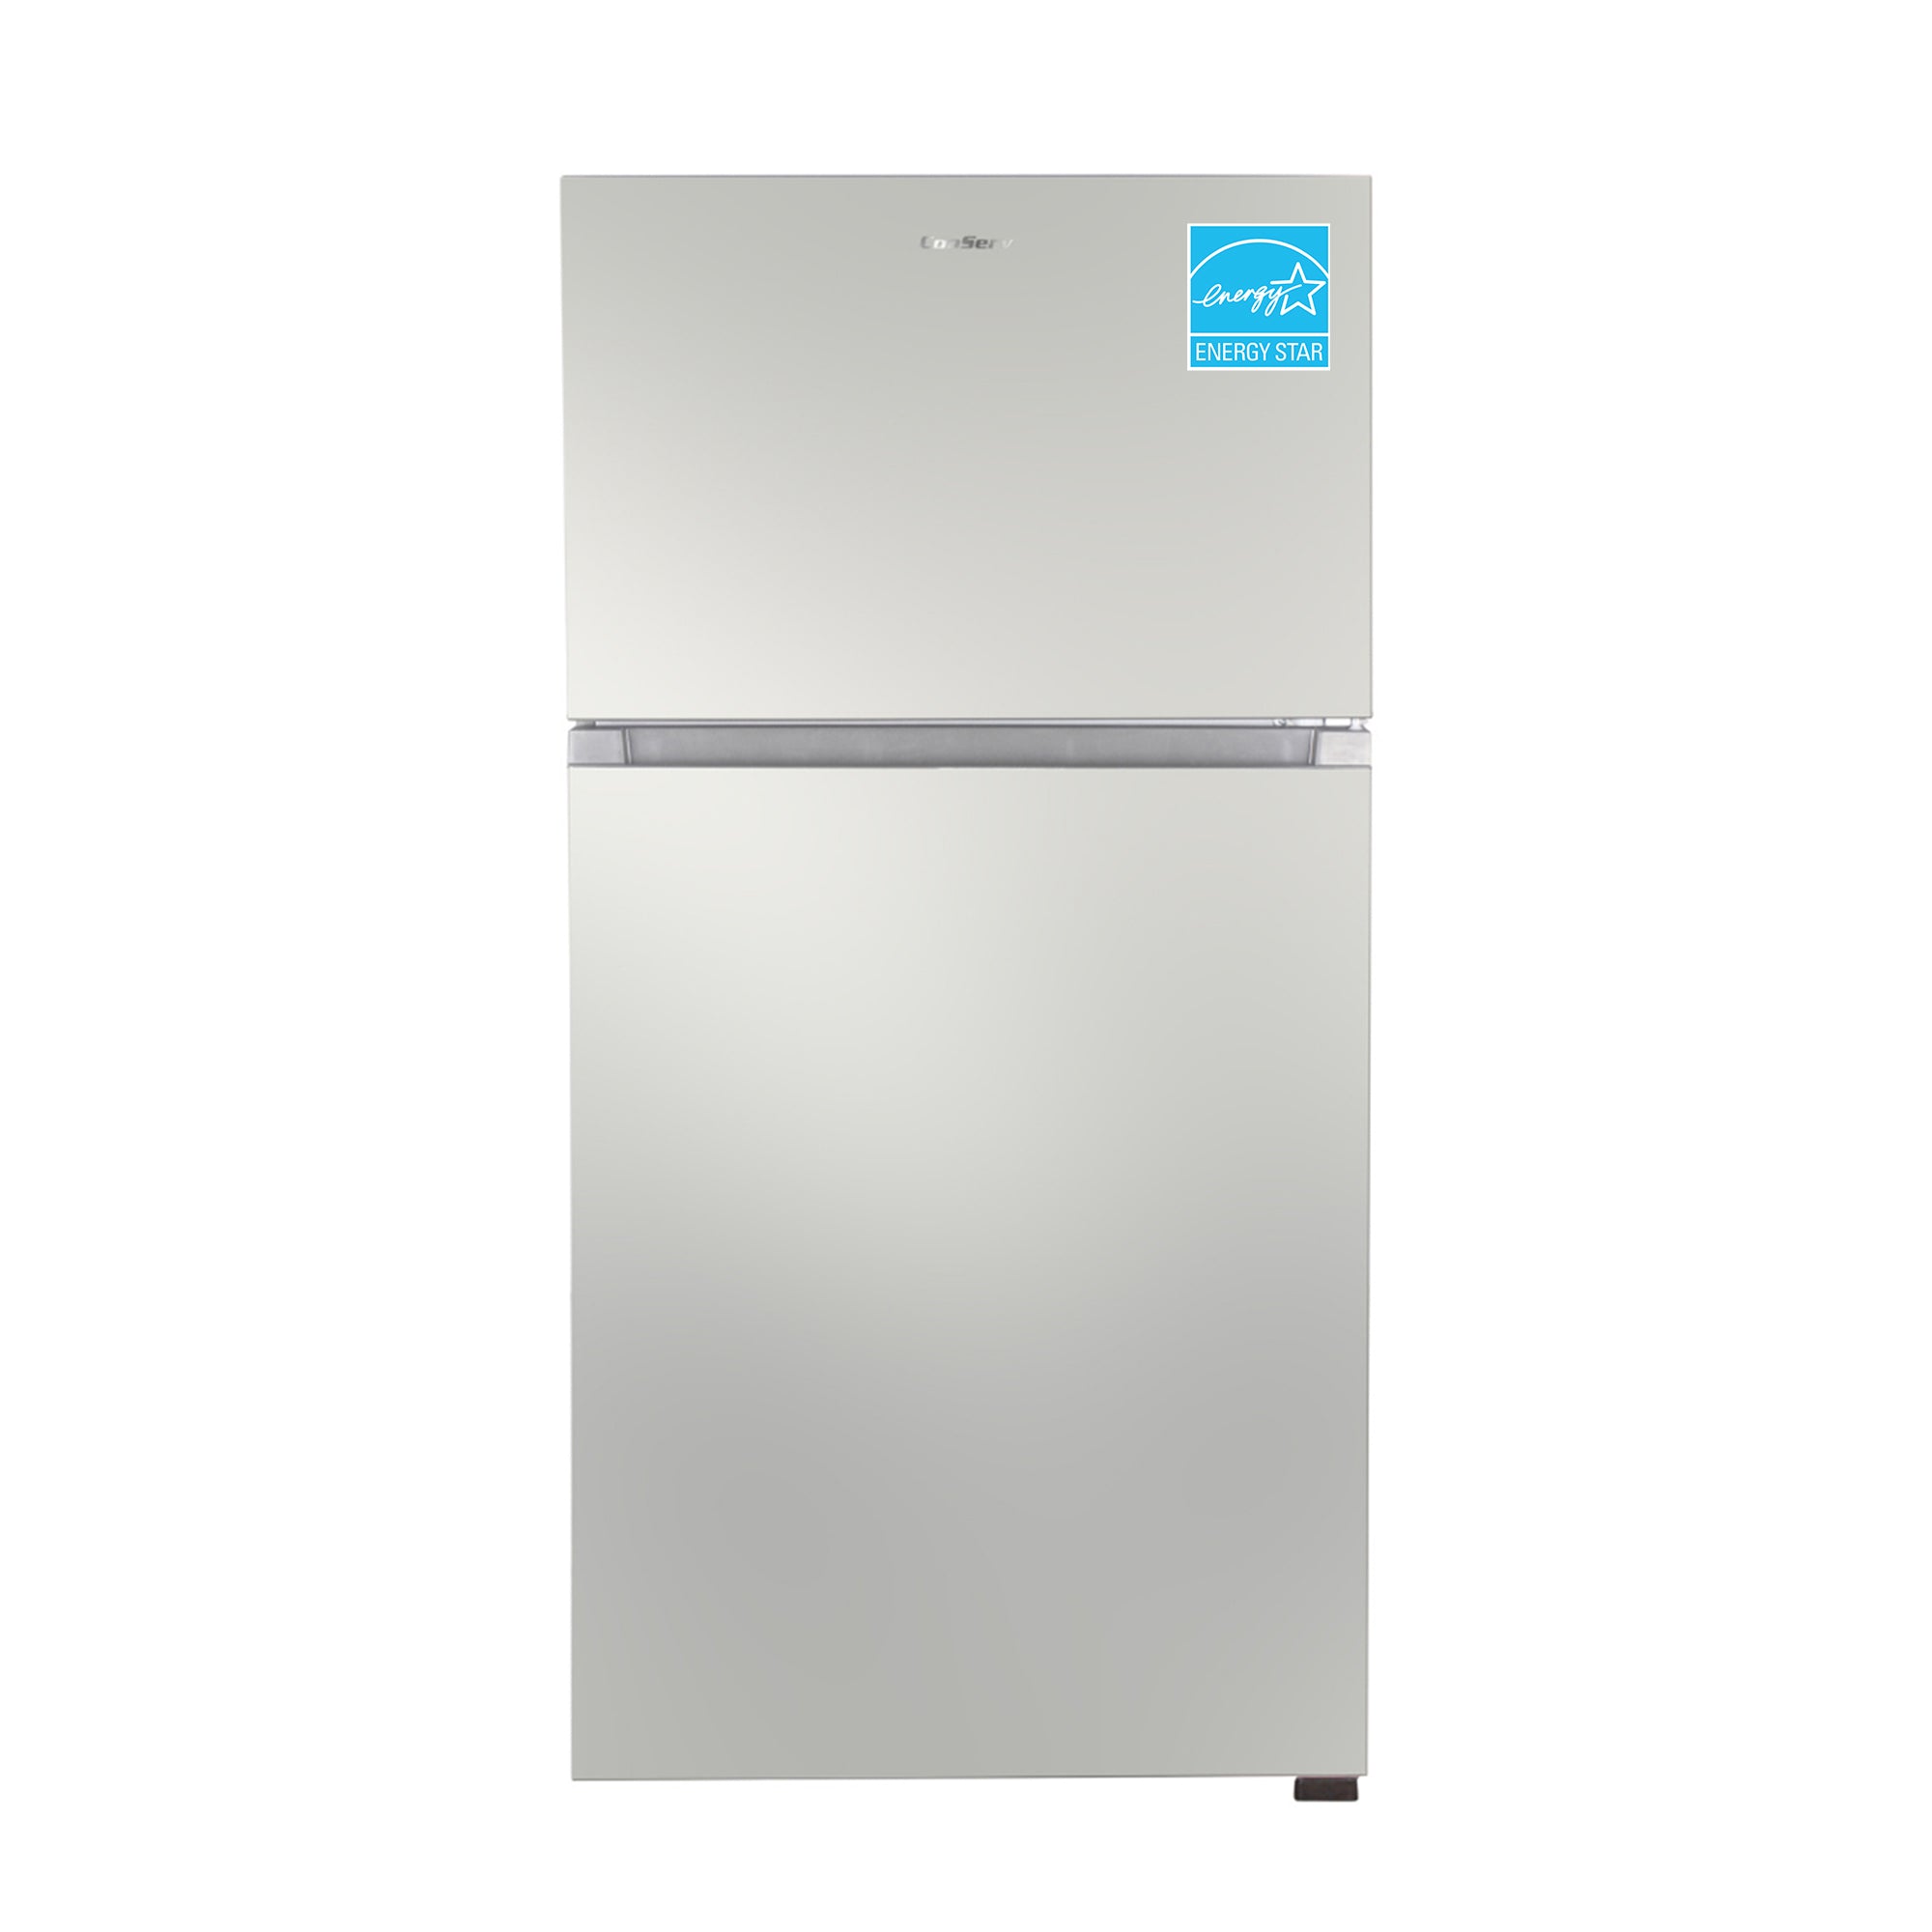 Equator Advanced Appliances Conserv 18 cf Stainless Refrigerator-Freezer Top Mount Frost Free with Ice Maker